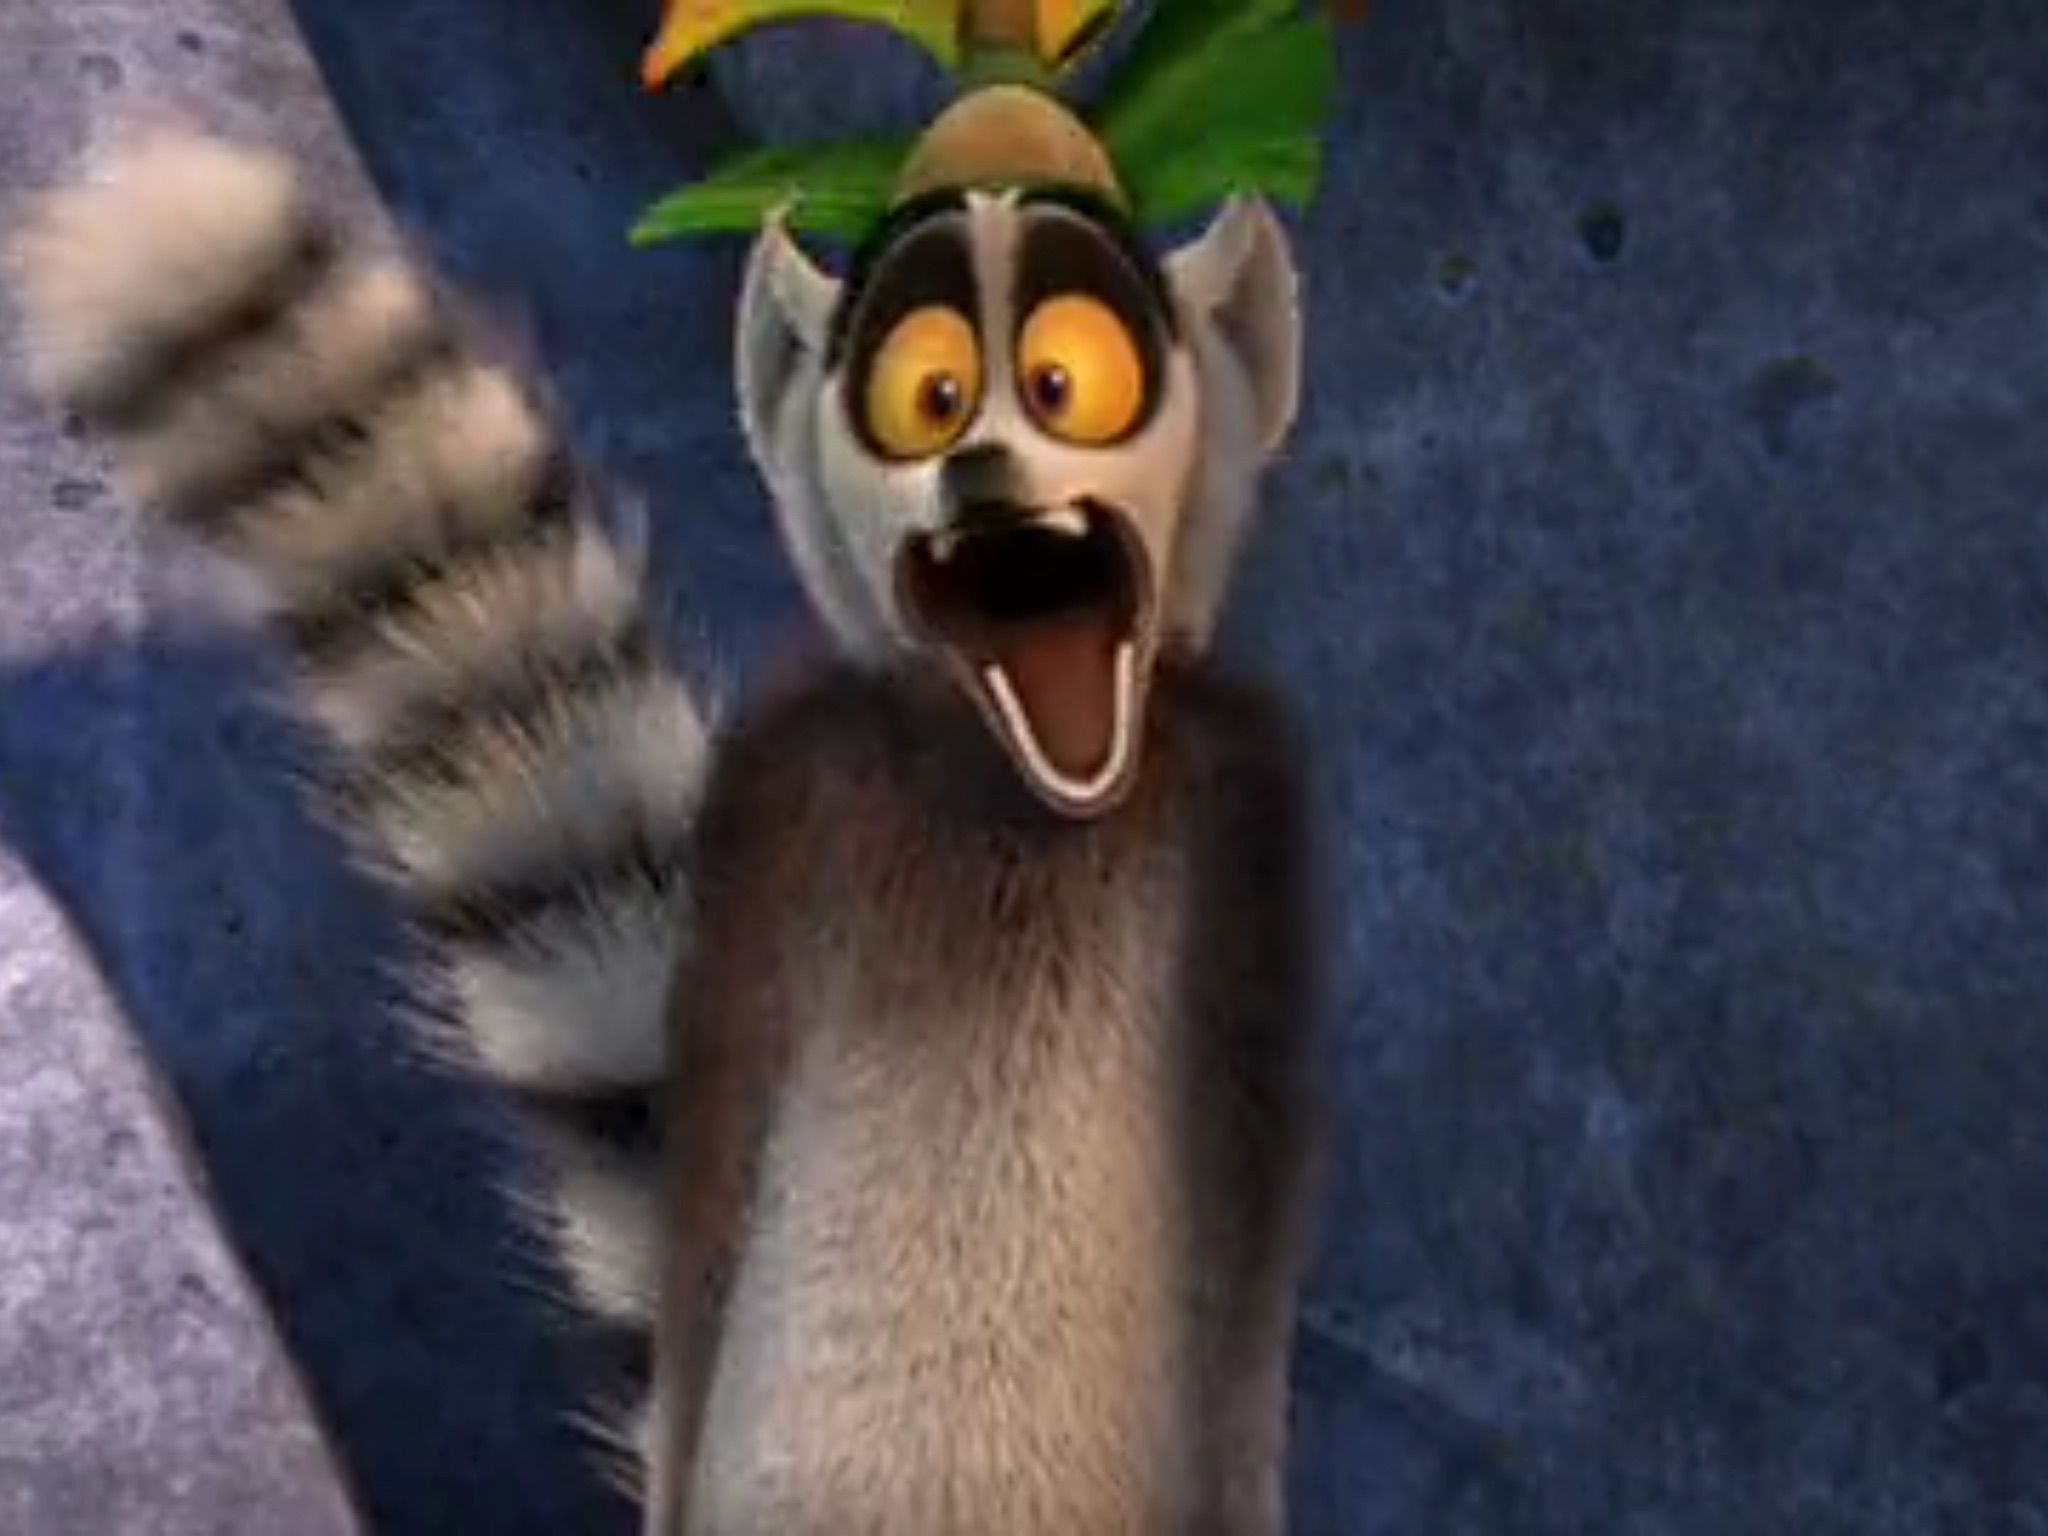 When new All Hail King Julien episodes come out